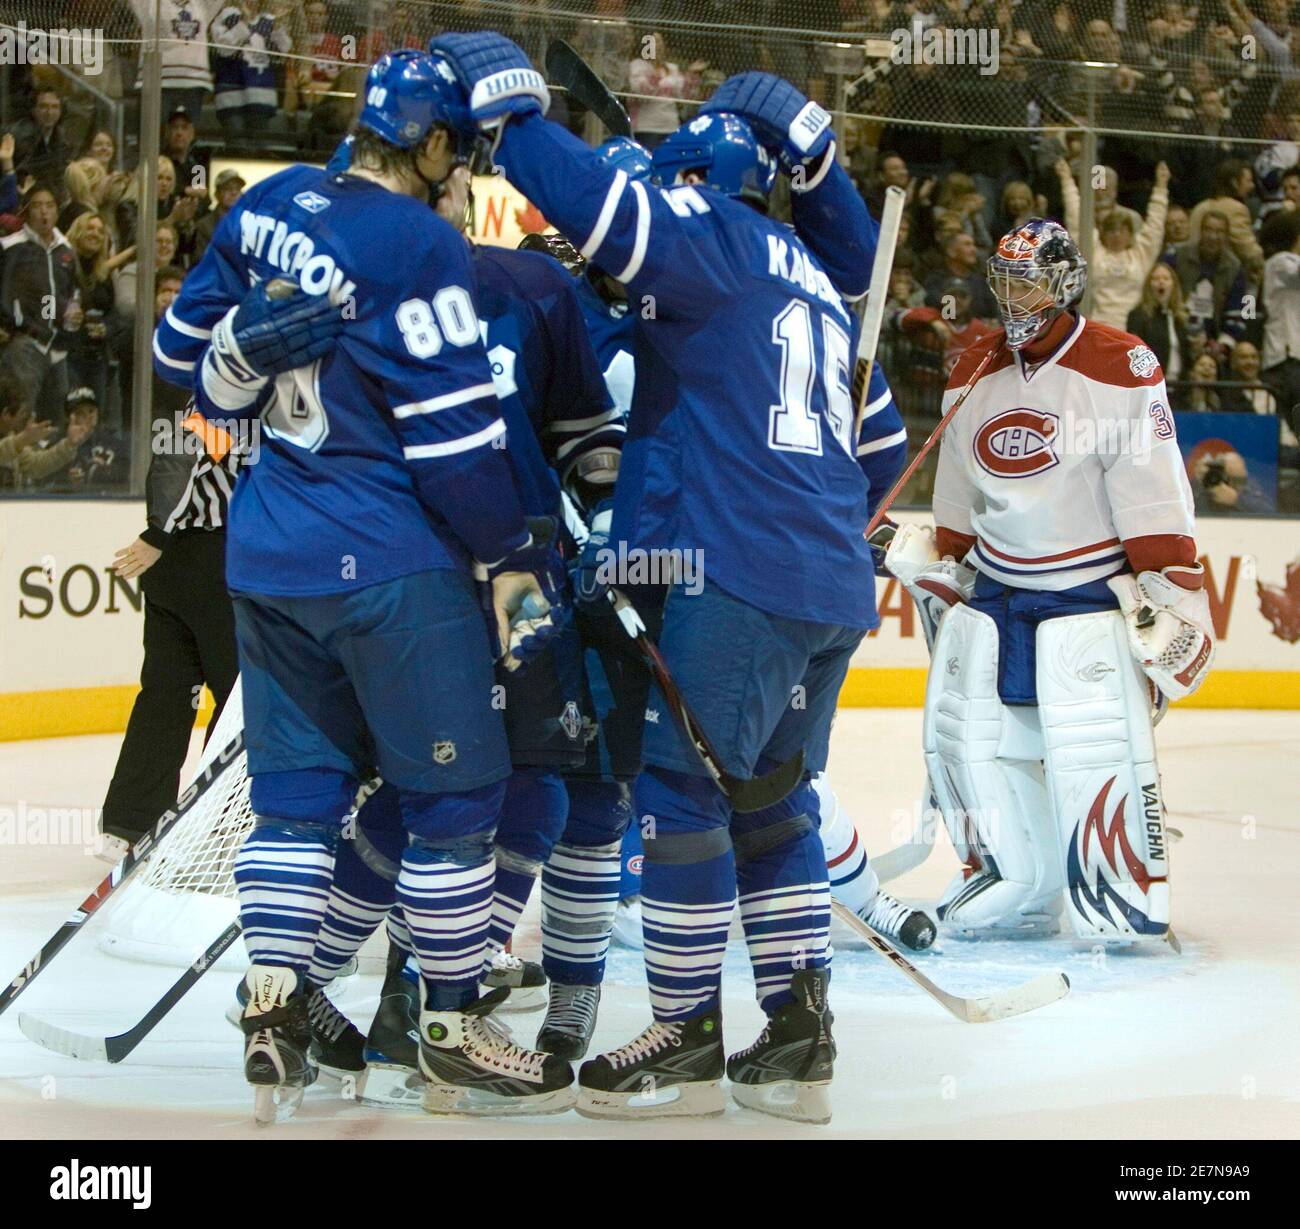 Toronto Maple Leafs celebrate their second period goal by Nik Antropov as  Montreal Canadiens goalie Carey Price skates behind them during their NHL  hockey game in Toronto, November 8, 2008. REUTERS/Fred Thornhill (